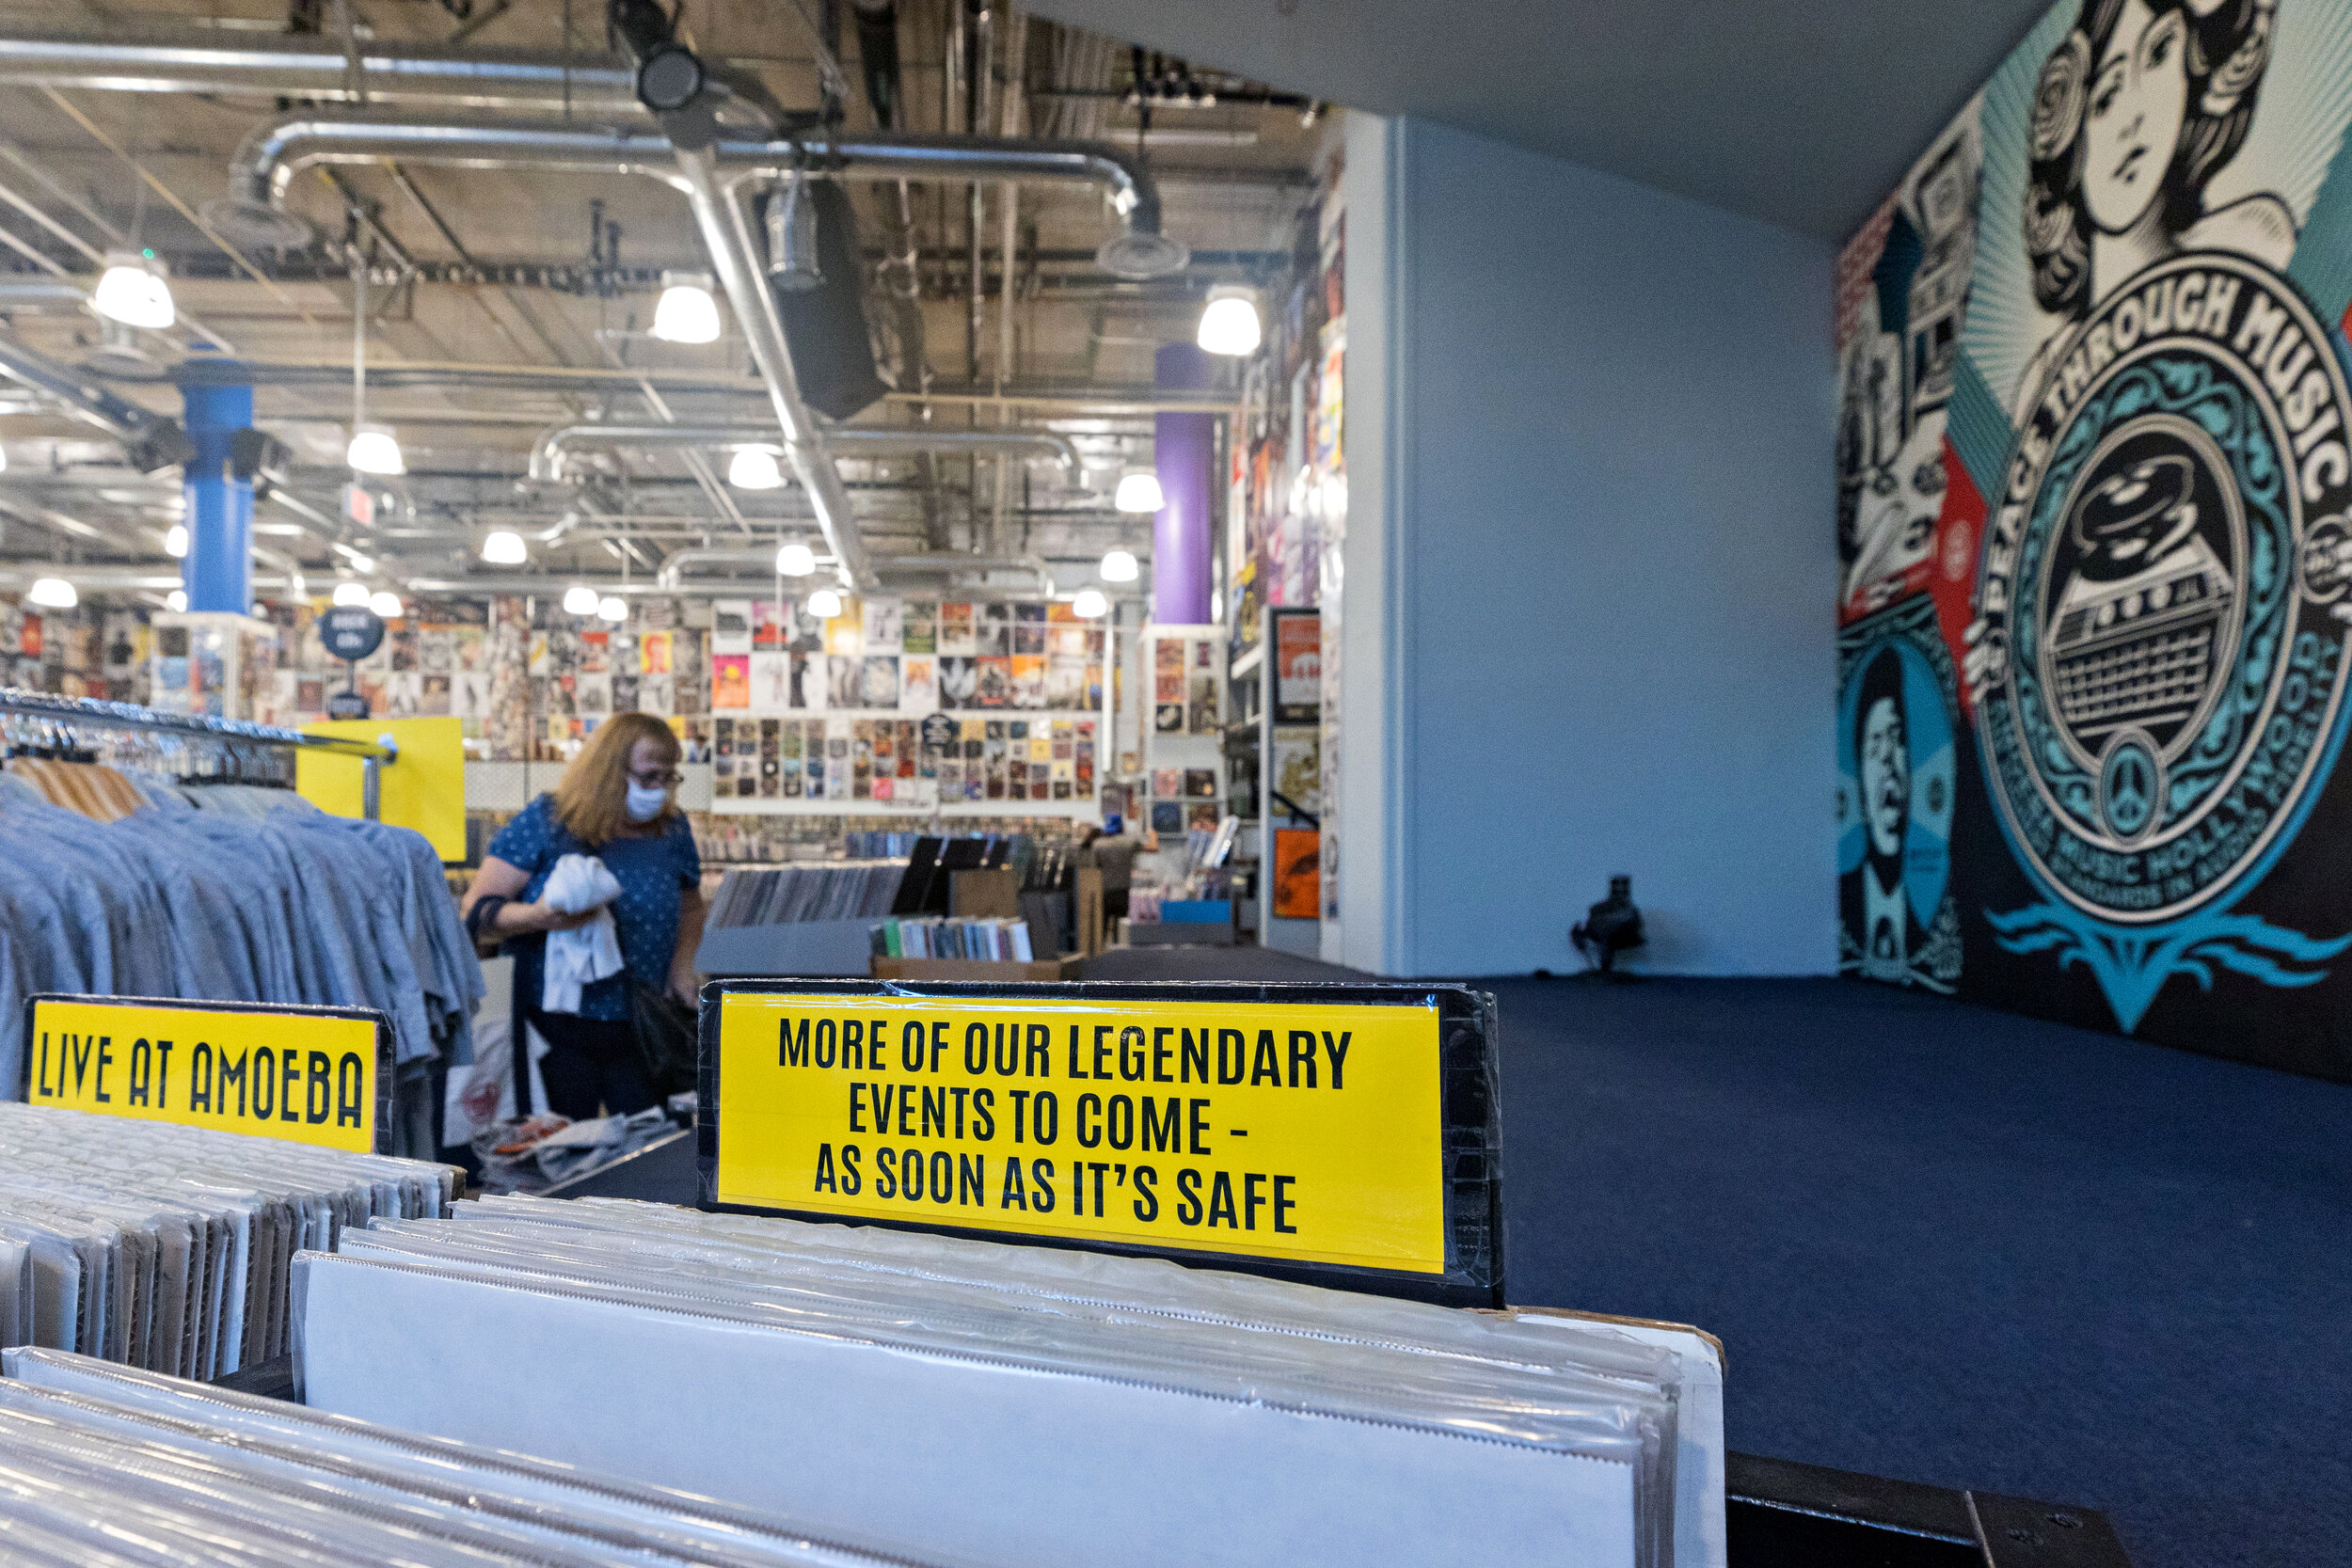  The stage inside Amoeba Music, an iconic Hollywood record store, as it prepares to reopen at thier new location at 6200 Hollywood Blvd., in Hollywood Neighborhood of Los Angeles, California on Wednesday, March 30, 2021.  The previous location, nearb